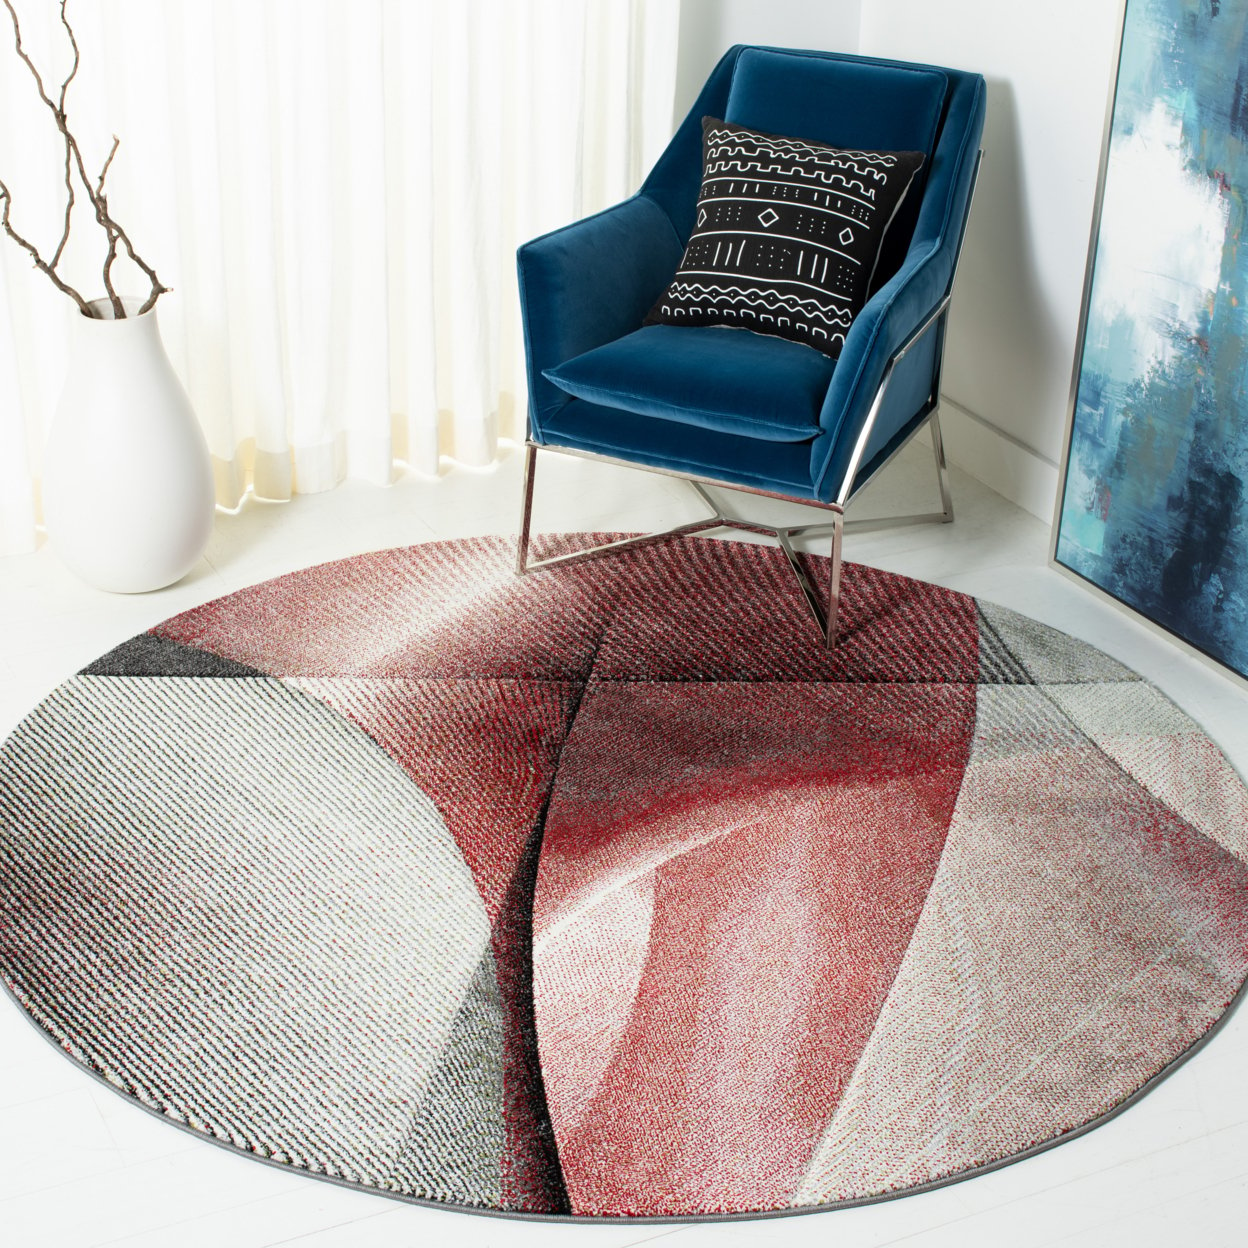 SAFAVIEH Hollywood Collection HLW715Q Grey / Red Rug - 6-7 X 6-7 Round